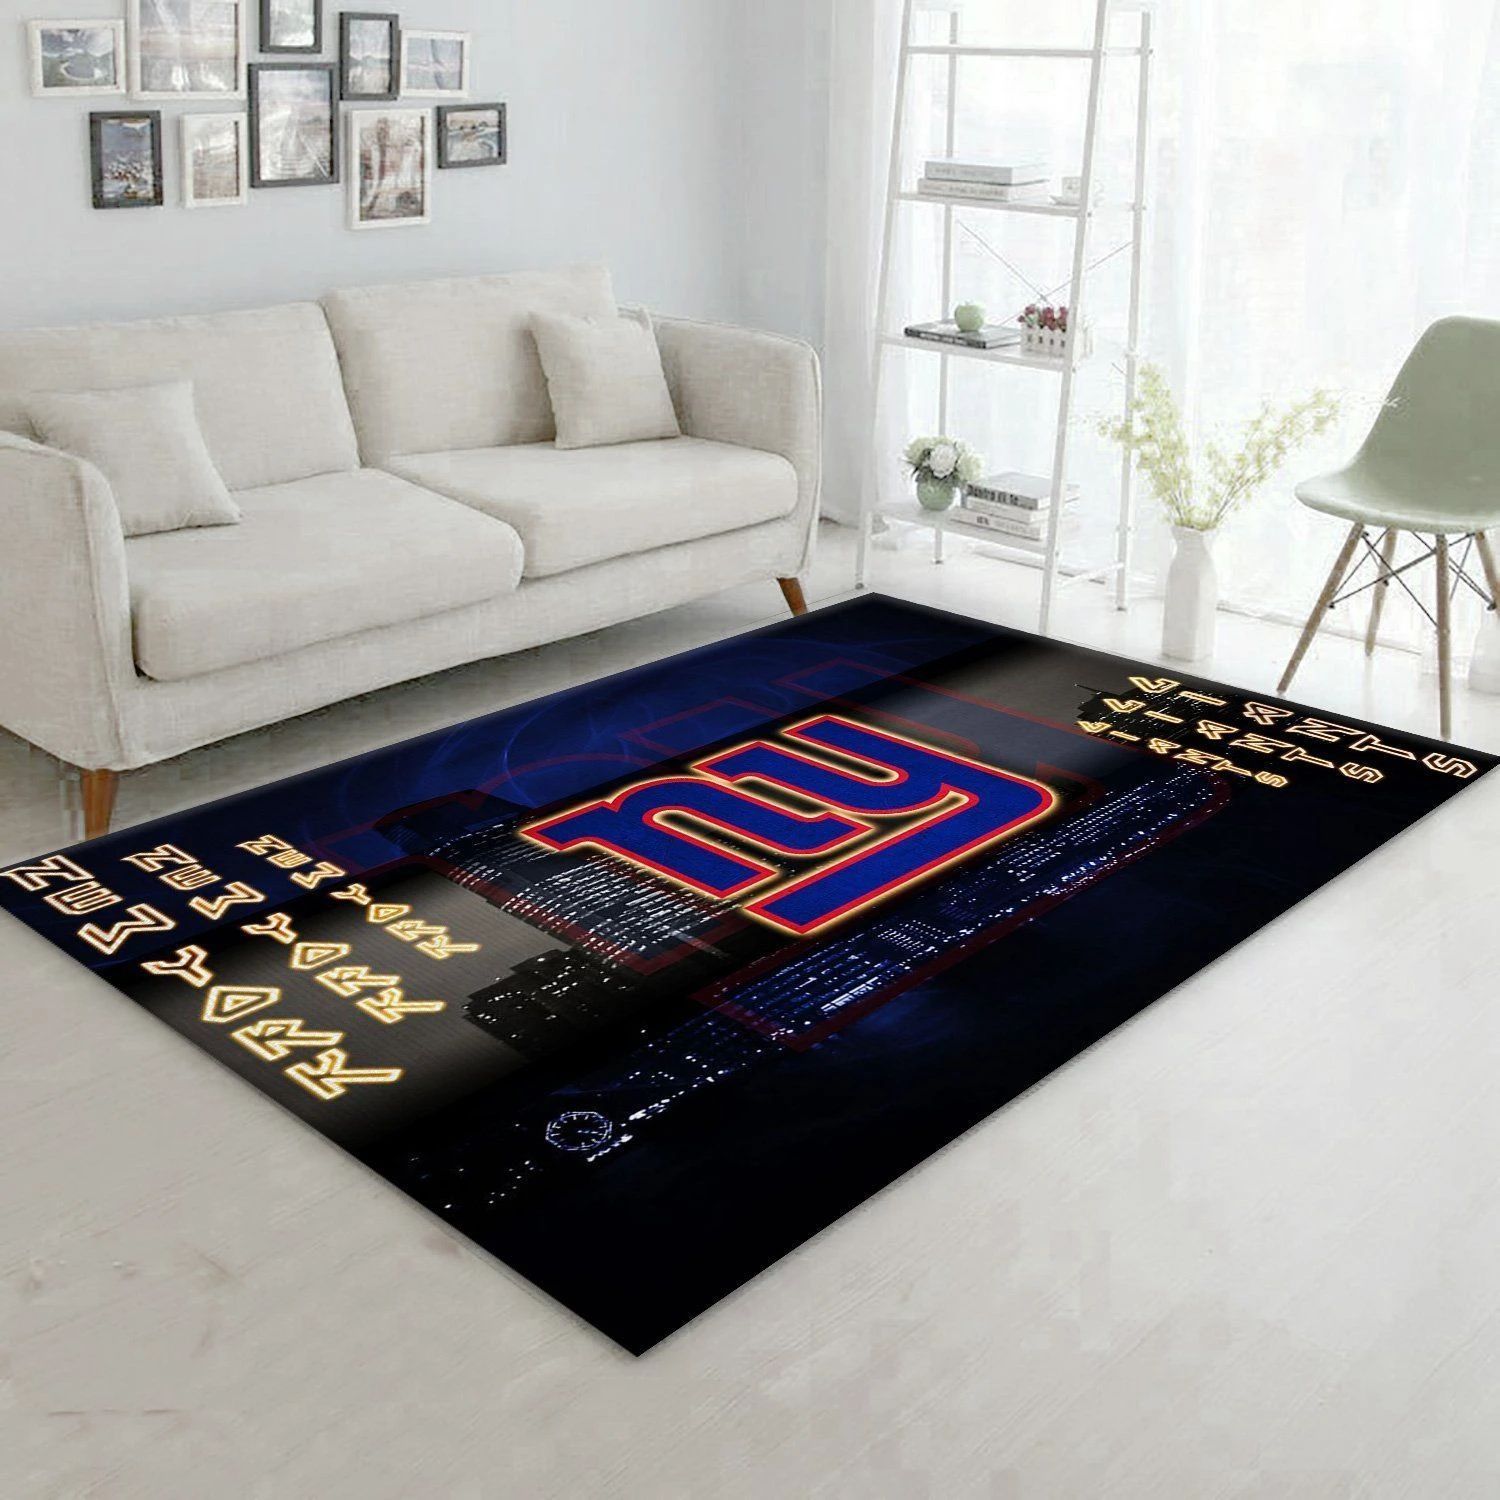 New York Giants Nfl Area Rug For Christmas Living Room Rug Home US Decor - Indoor Outdoor Rugs